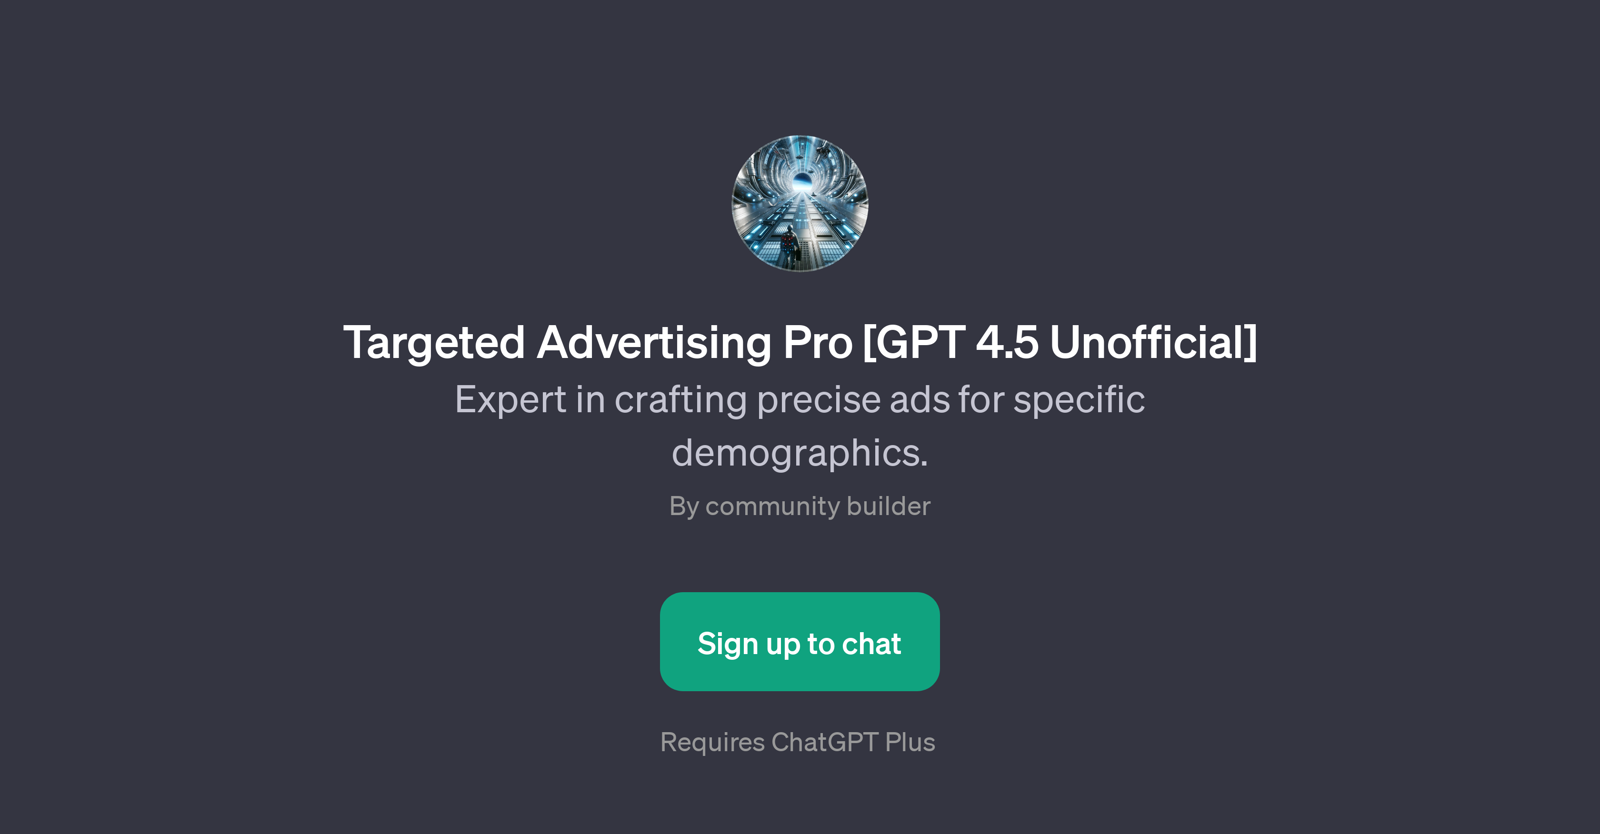 Targeted Advertising Pro [GPT 4.5 Unofficial] website